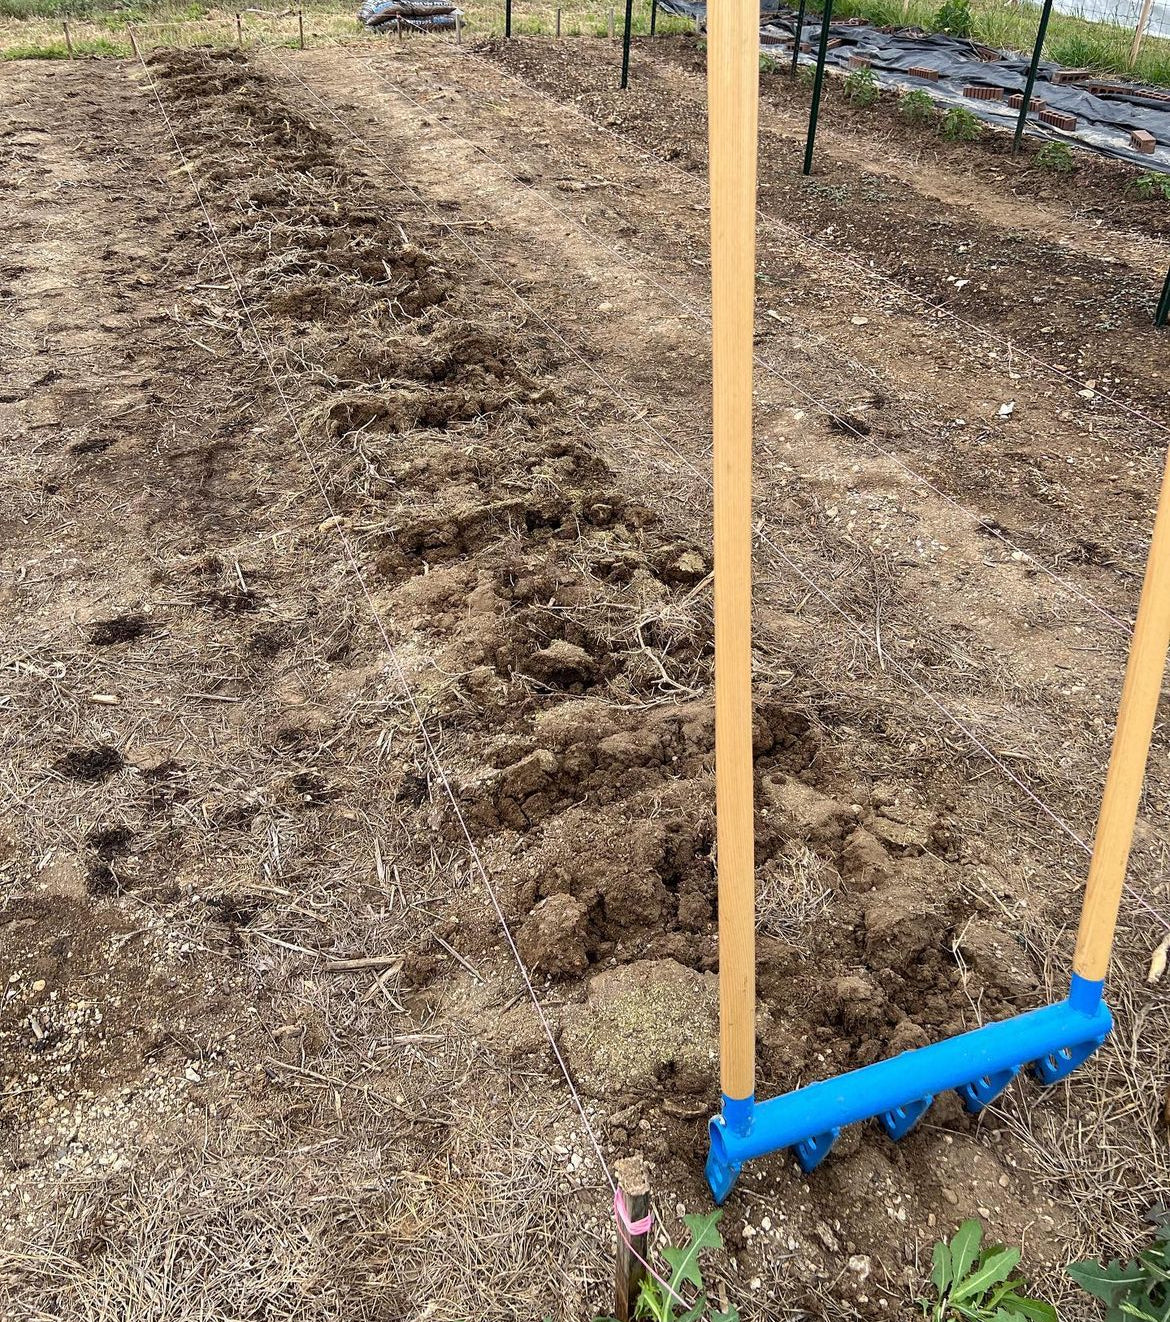 The Treadlite Broadfork is a superior strength lightweight hand tiller designed to promote soil health and prep your farm and garden beds for planting